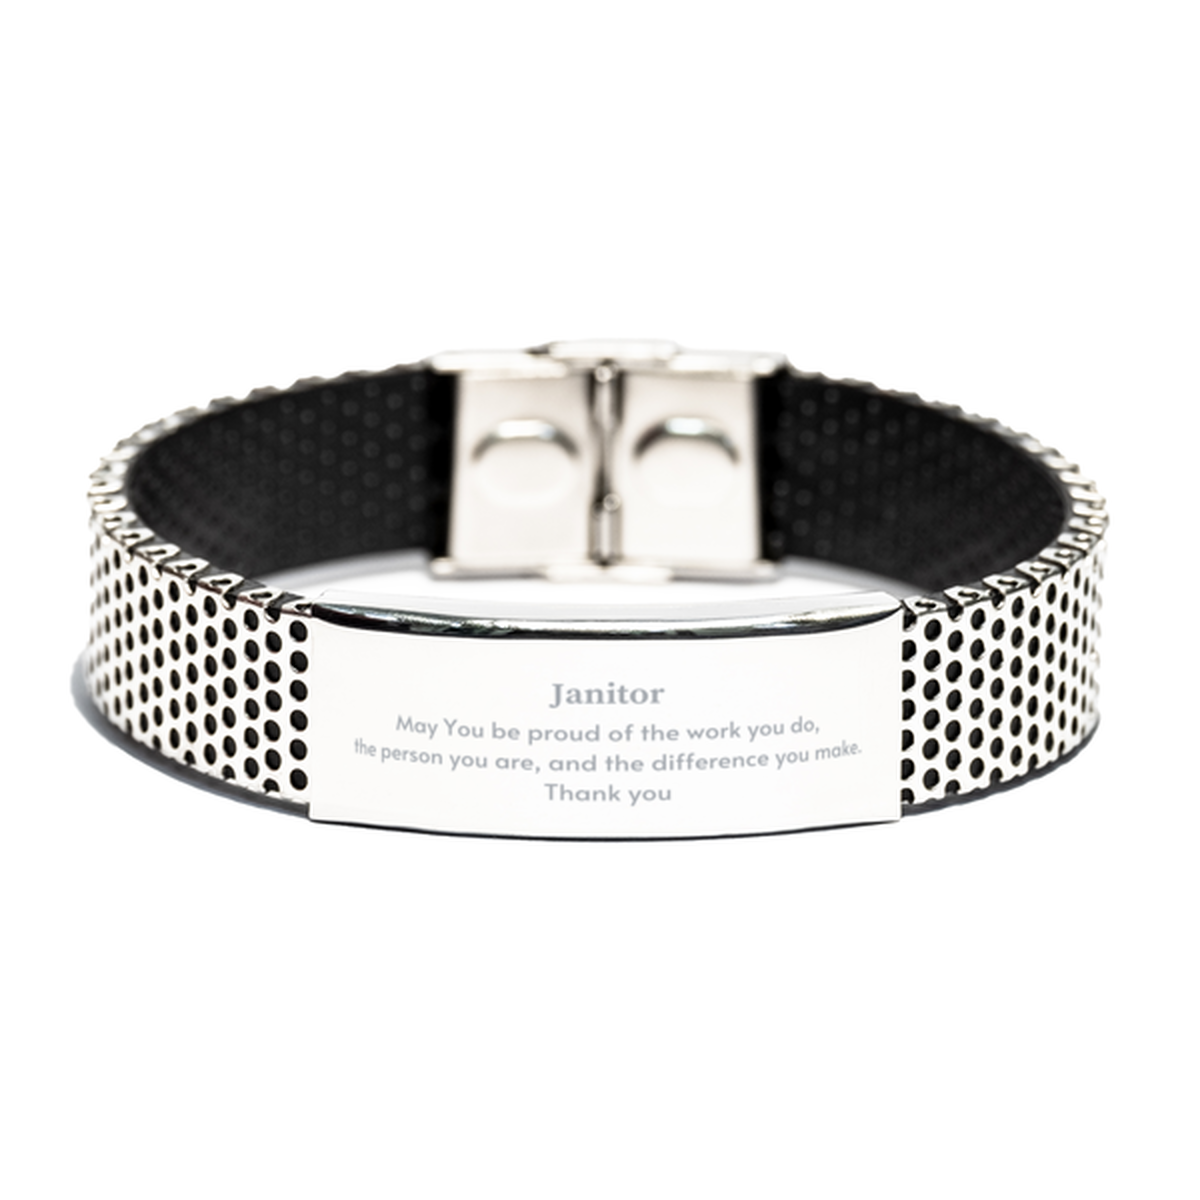 Heartwarming Stainless Steel Bracelet Retirement Coworkers Gifts for Janitor, Janitor May You be proud of the work you do, the person you are Gifts for Boss Men Women Friends